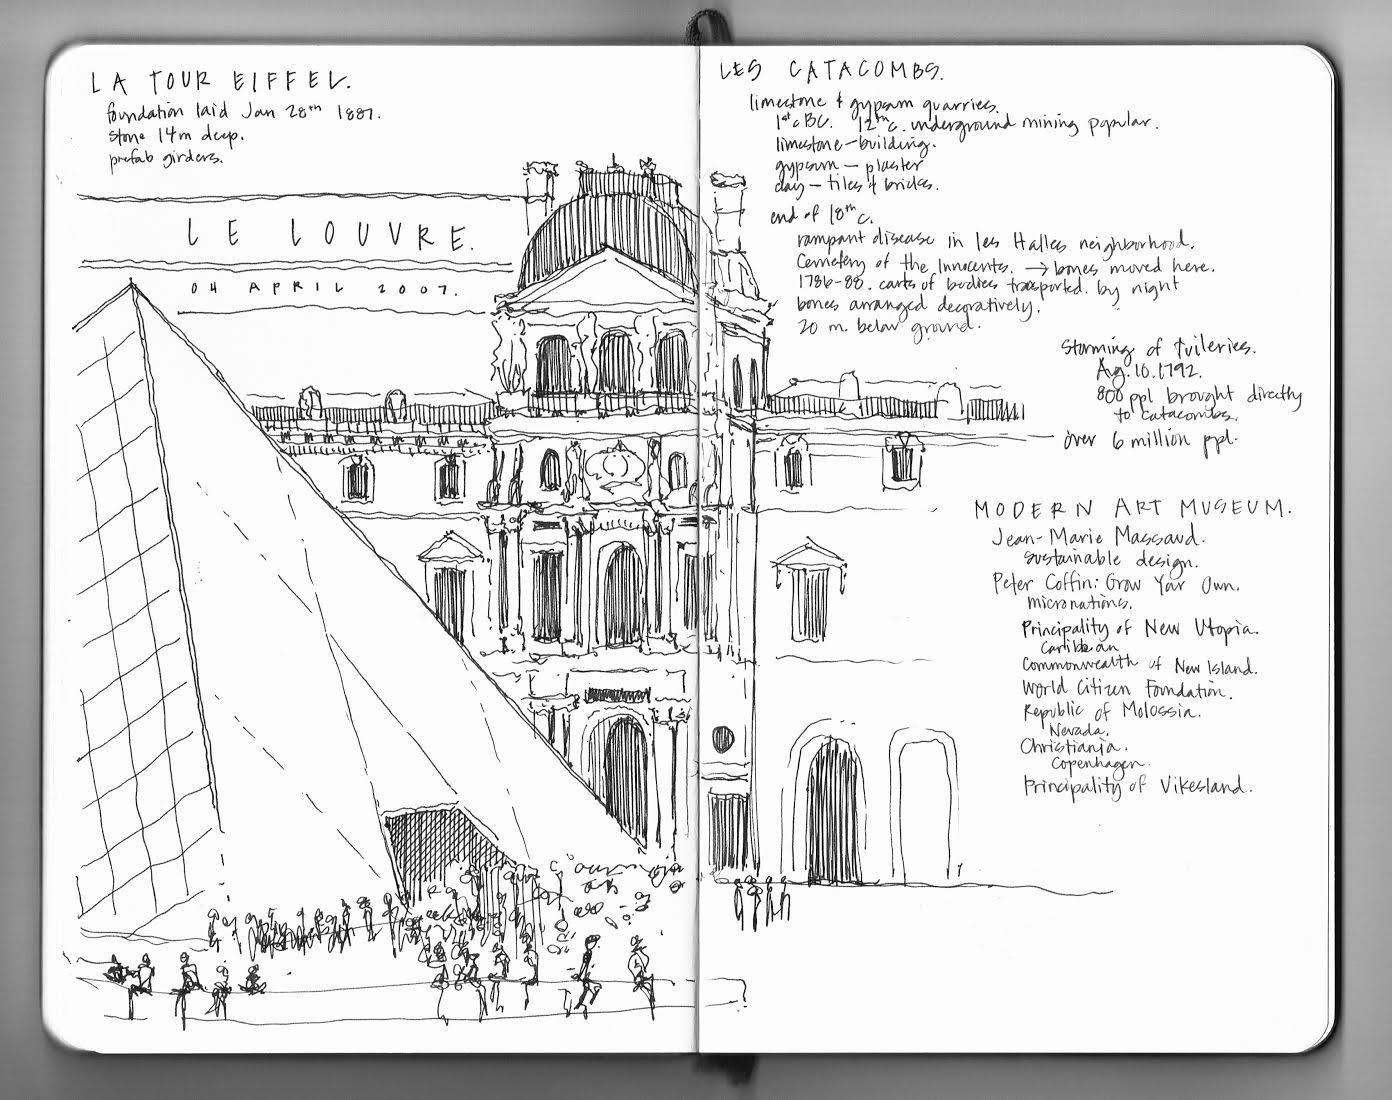 Sketches of the Louvre, art in Paris, travel France, Europe